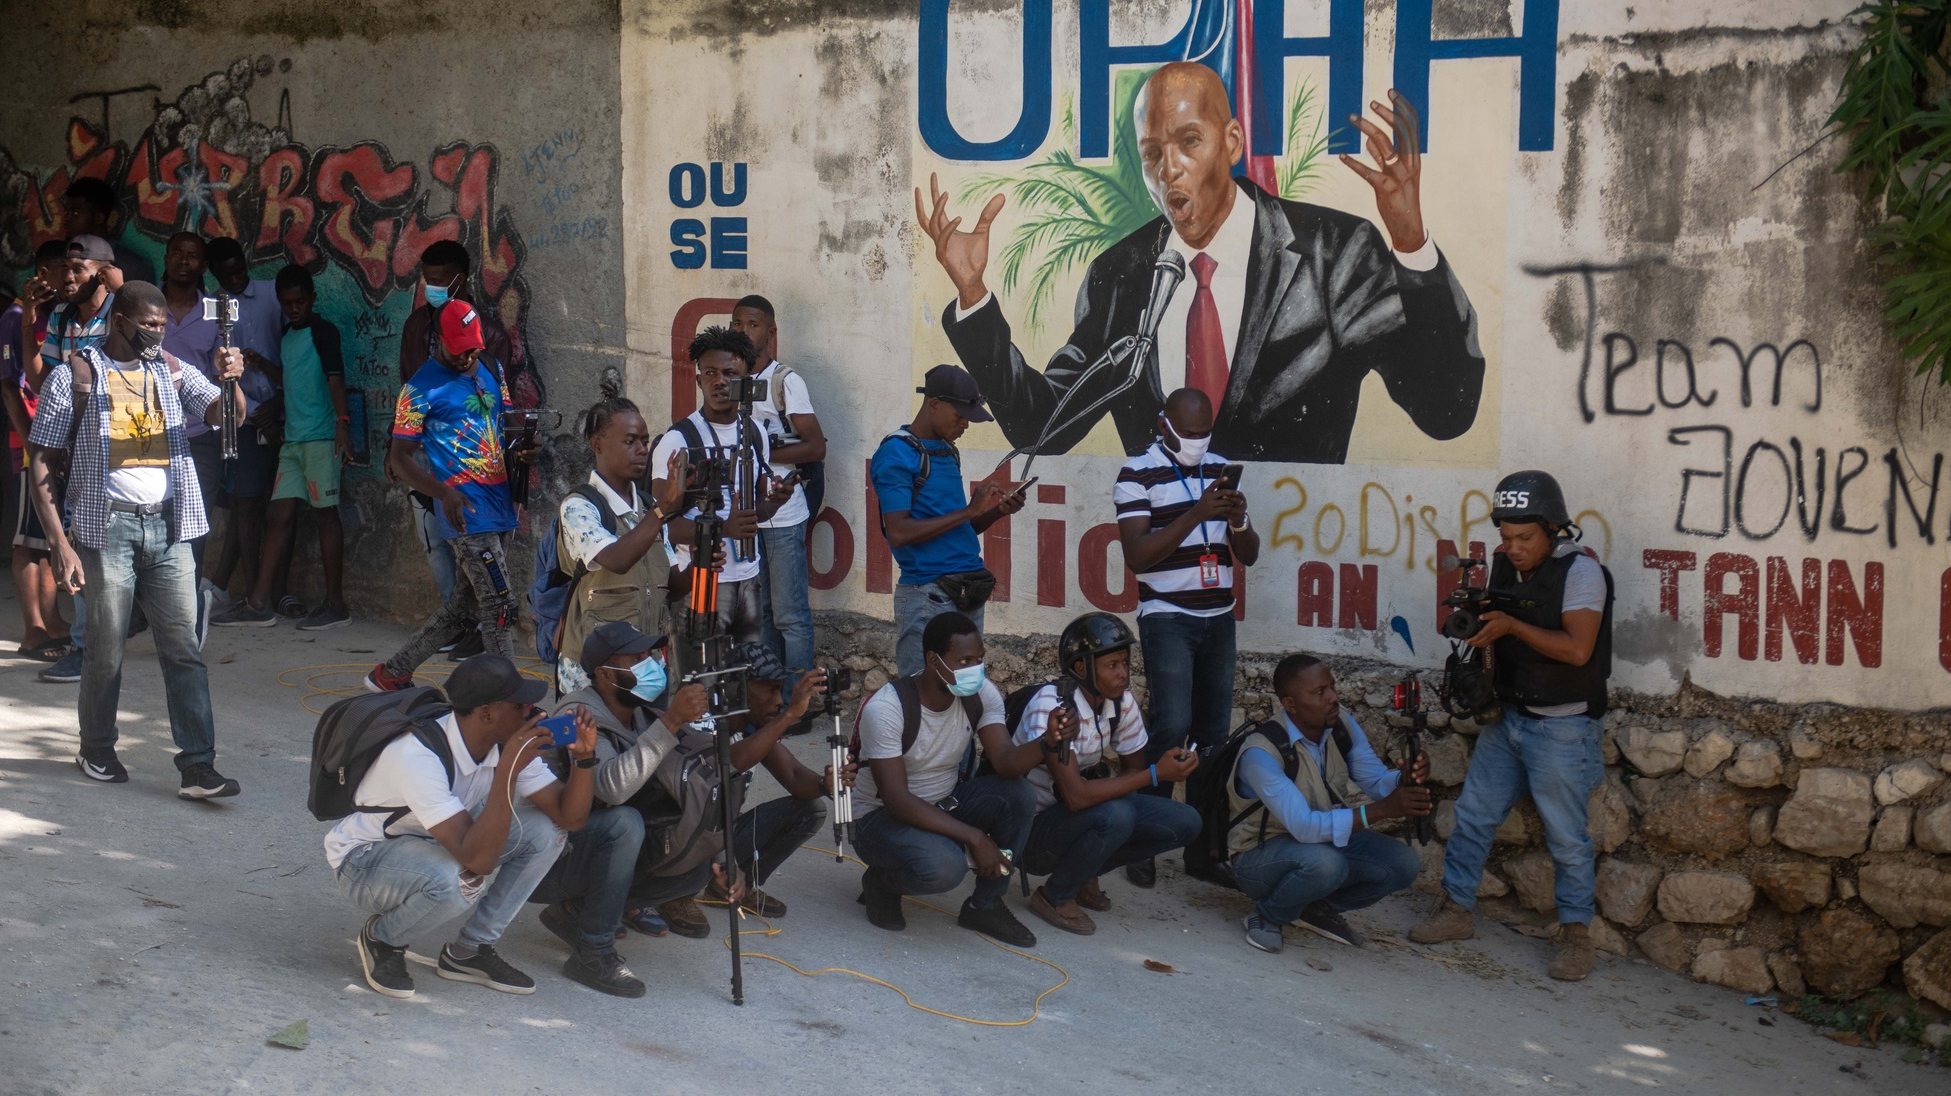 epa09329422 A group of journalists work next to a mural of the assassinated president Jovenel Moise, in Port-au-Prince, Haiti, 07 July 2021. The President of Haiti Jovenel Moise, was assassinated on 07 July by armed men who carried out an attack on his residence in the early morning in the Pelerin neighborhood of Port-au-Prince, said interim prime minister, Claude Joseph.  EPA/JEAN MARC HERVE ABELARD